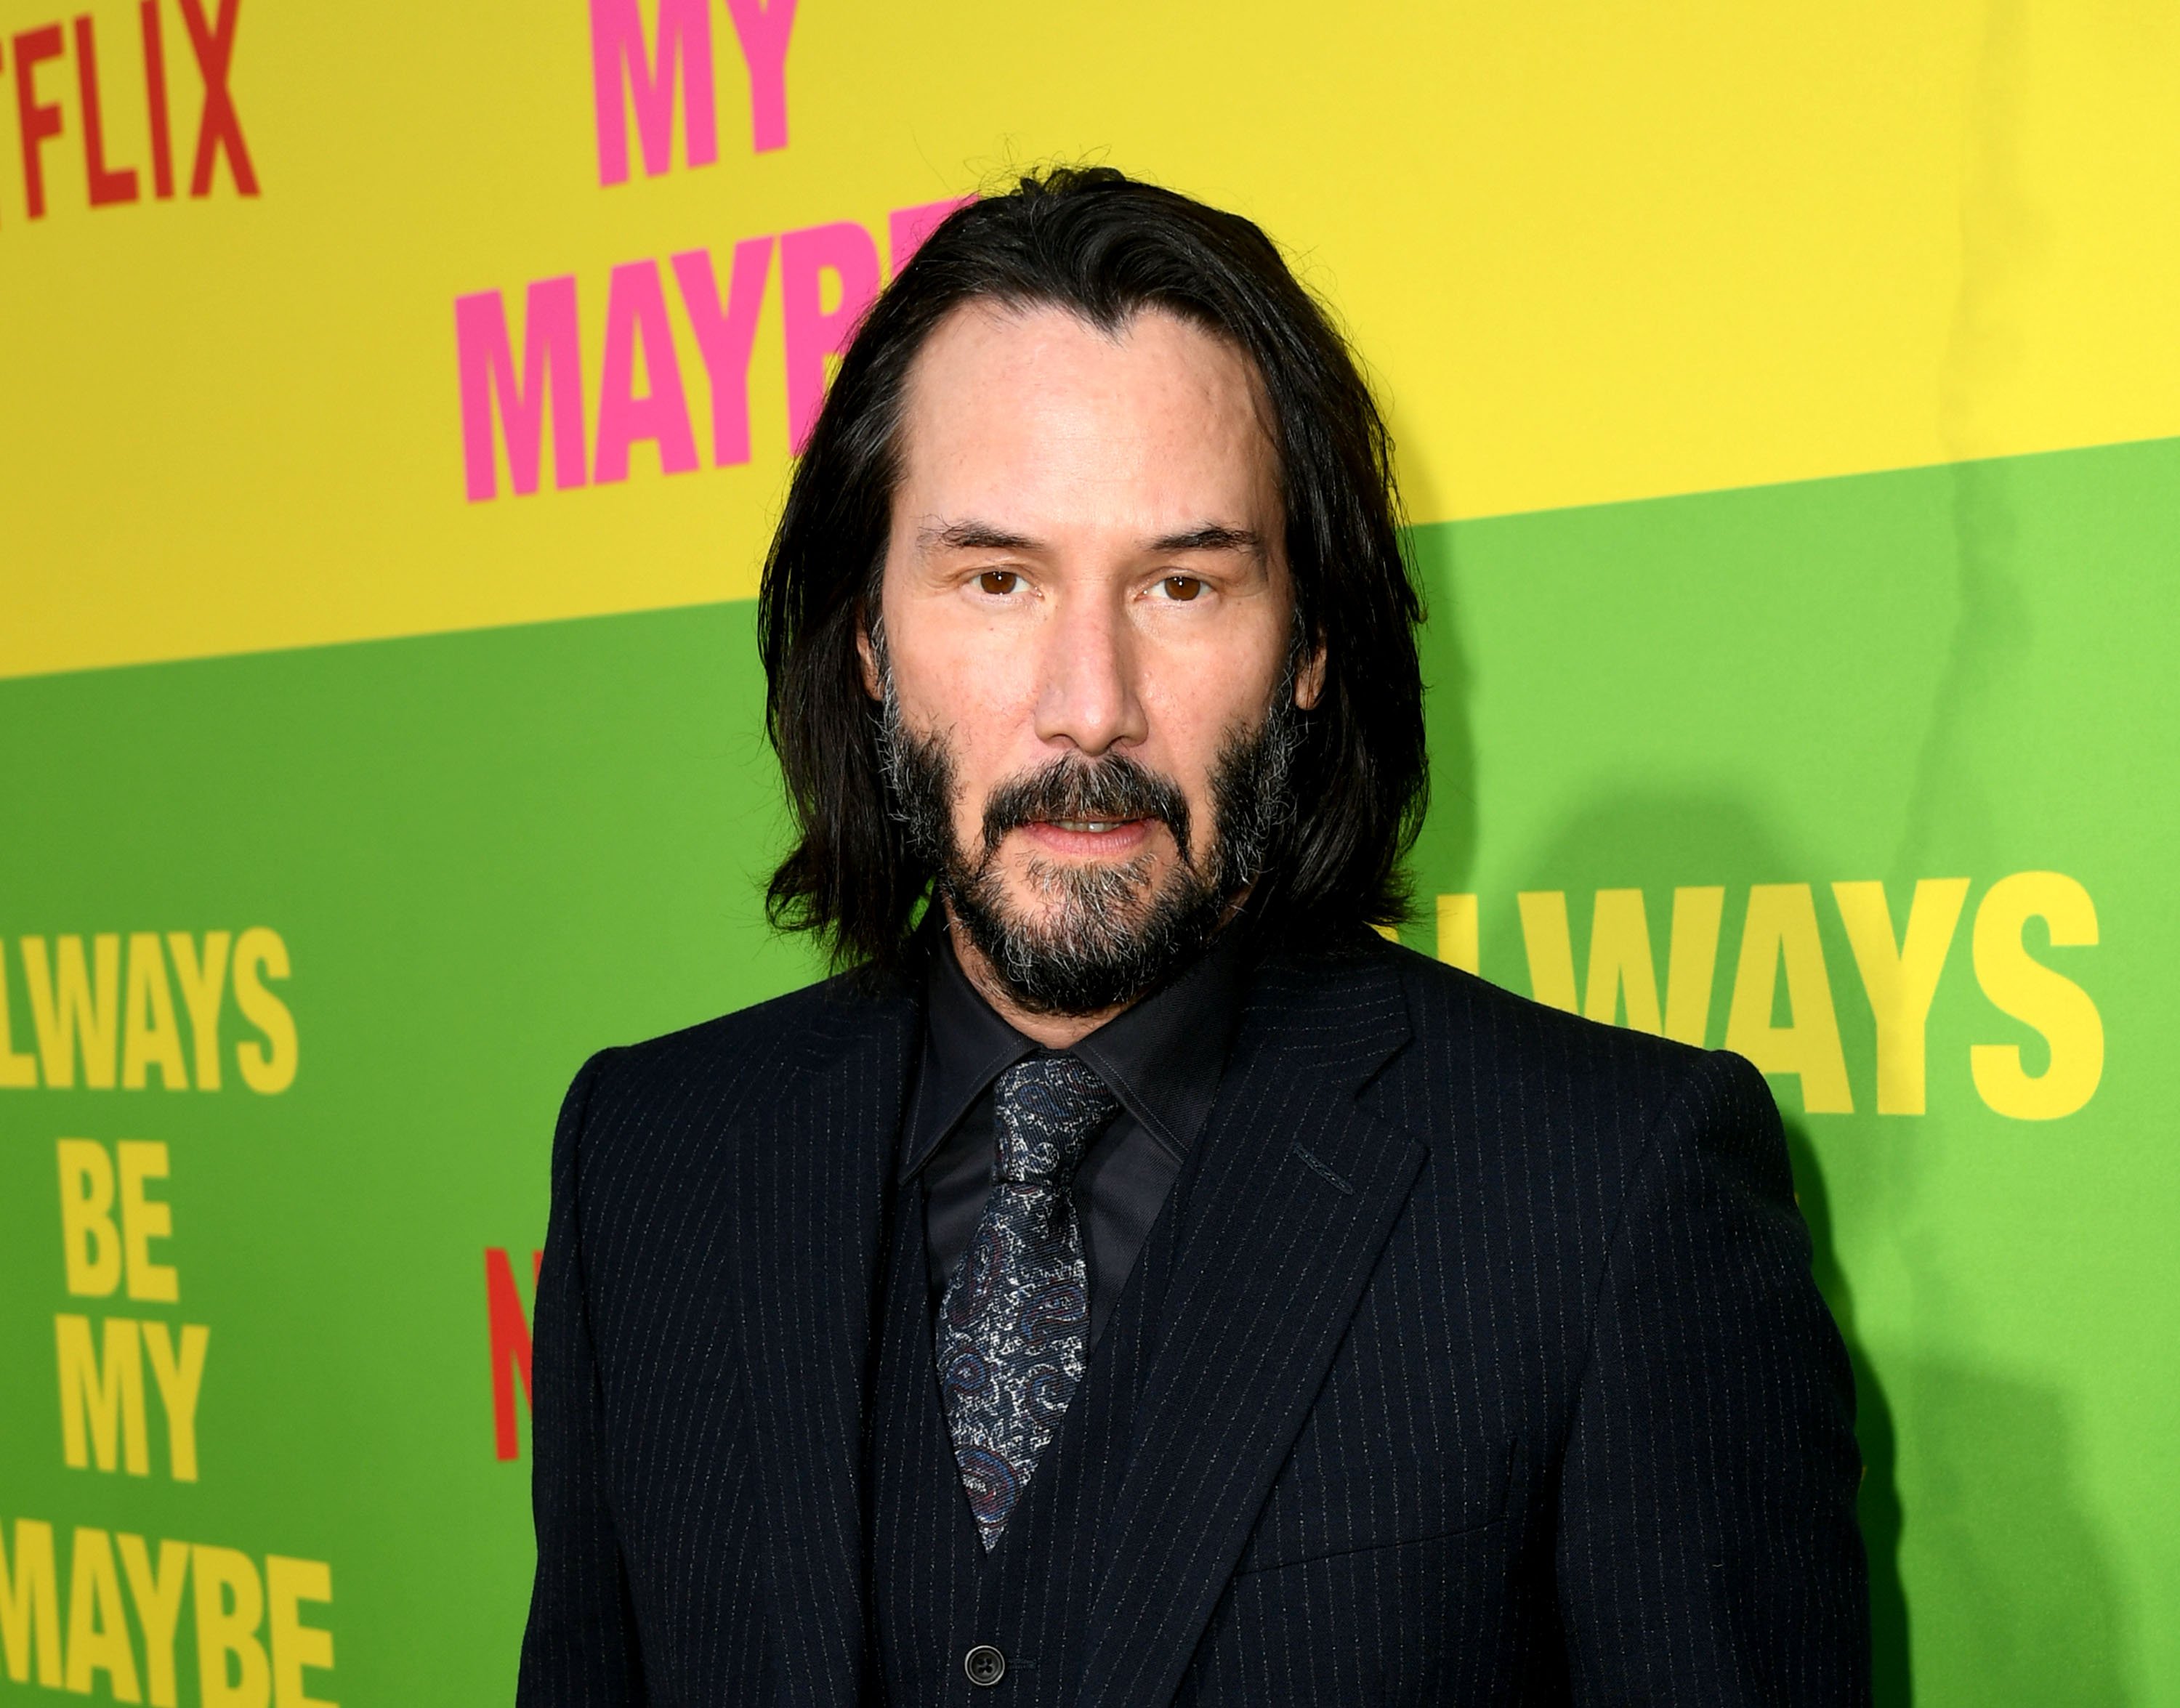 Keanu Reeves attends the premiere of Netflix's "Always Be My Maybe" at the Regency Village Theatre on May 22, 2019, in Westwood, California. | Source: Getty Images